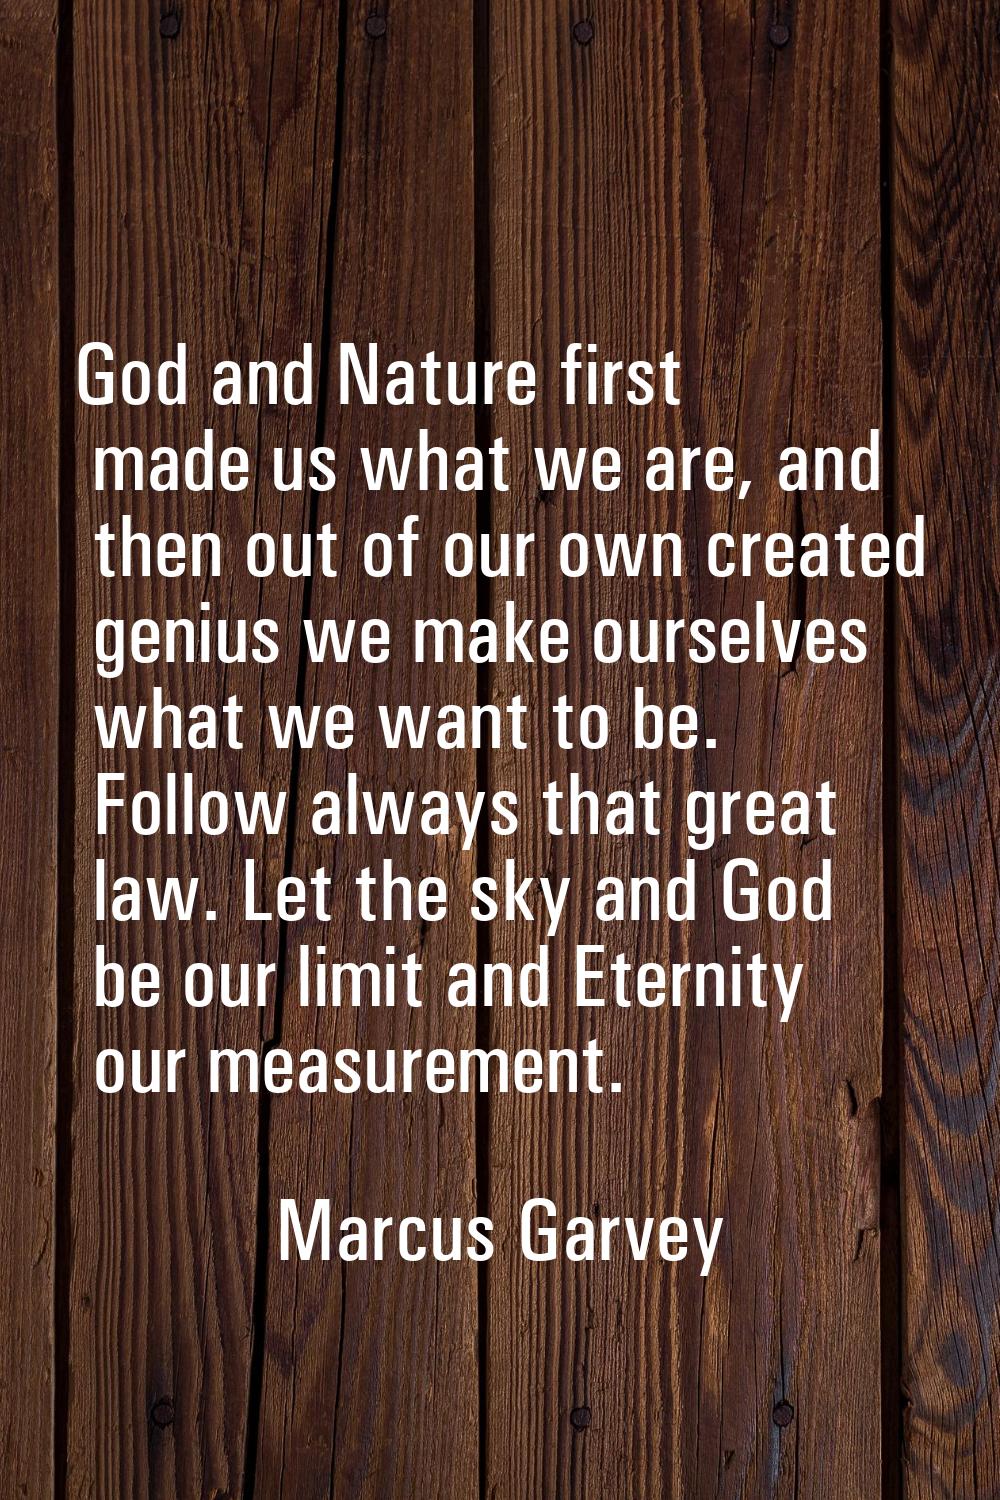 God and Nature first made us what we are, and then out of our own created genius we make ourselves 